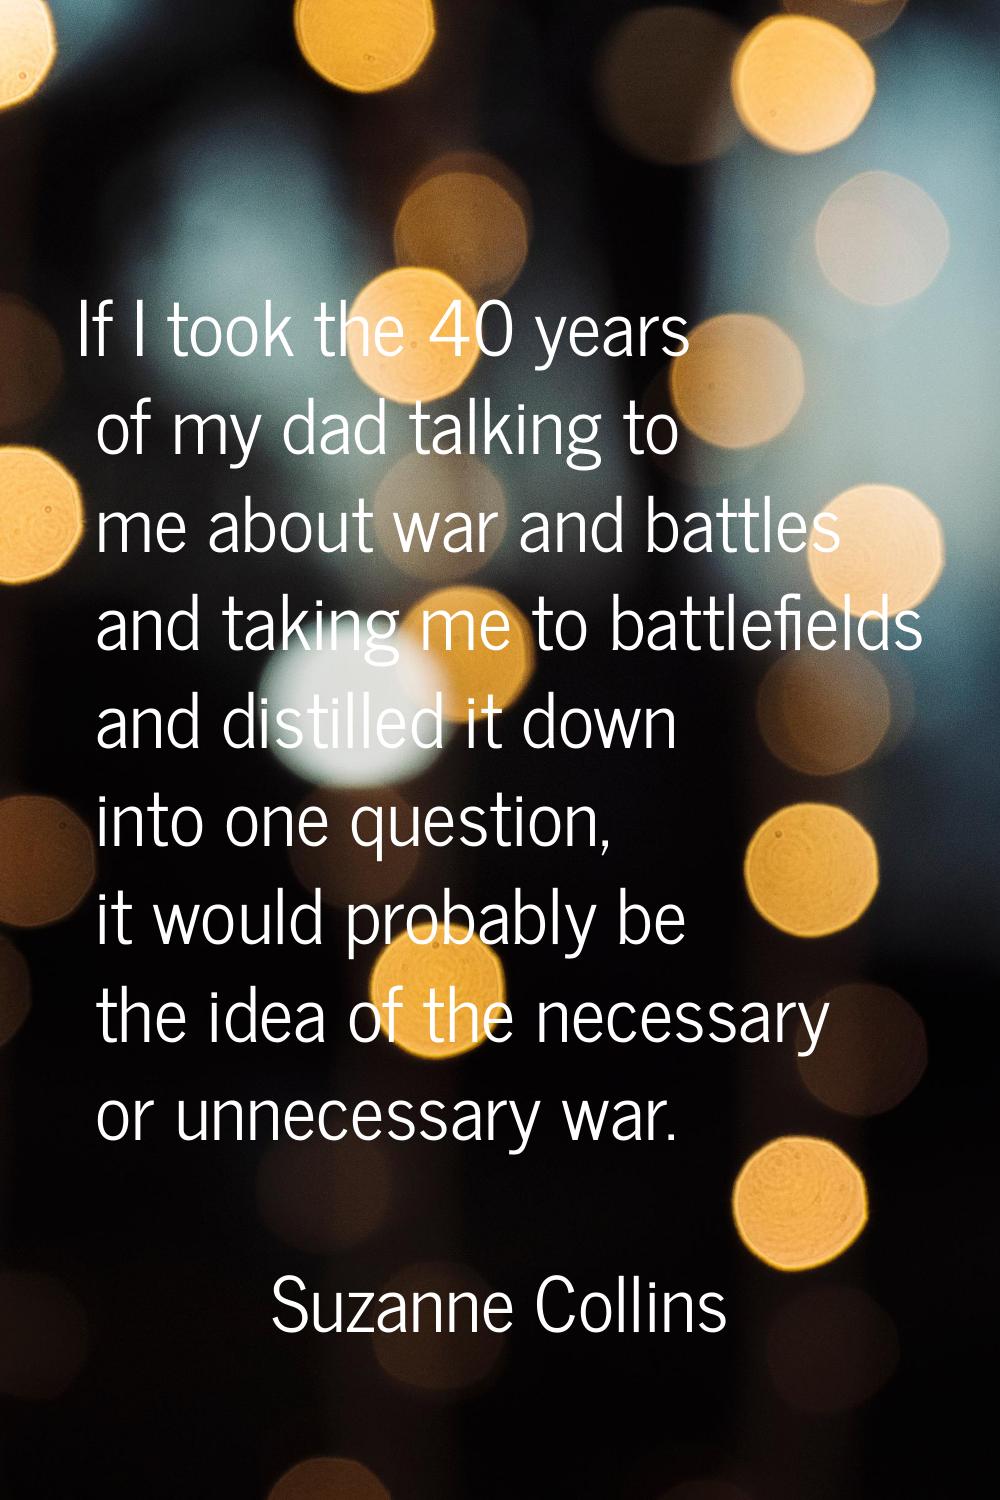 If I took the 40 years of my dad talking to me about war and battles and taking me to battlefields 